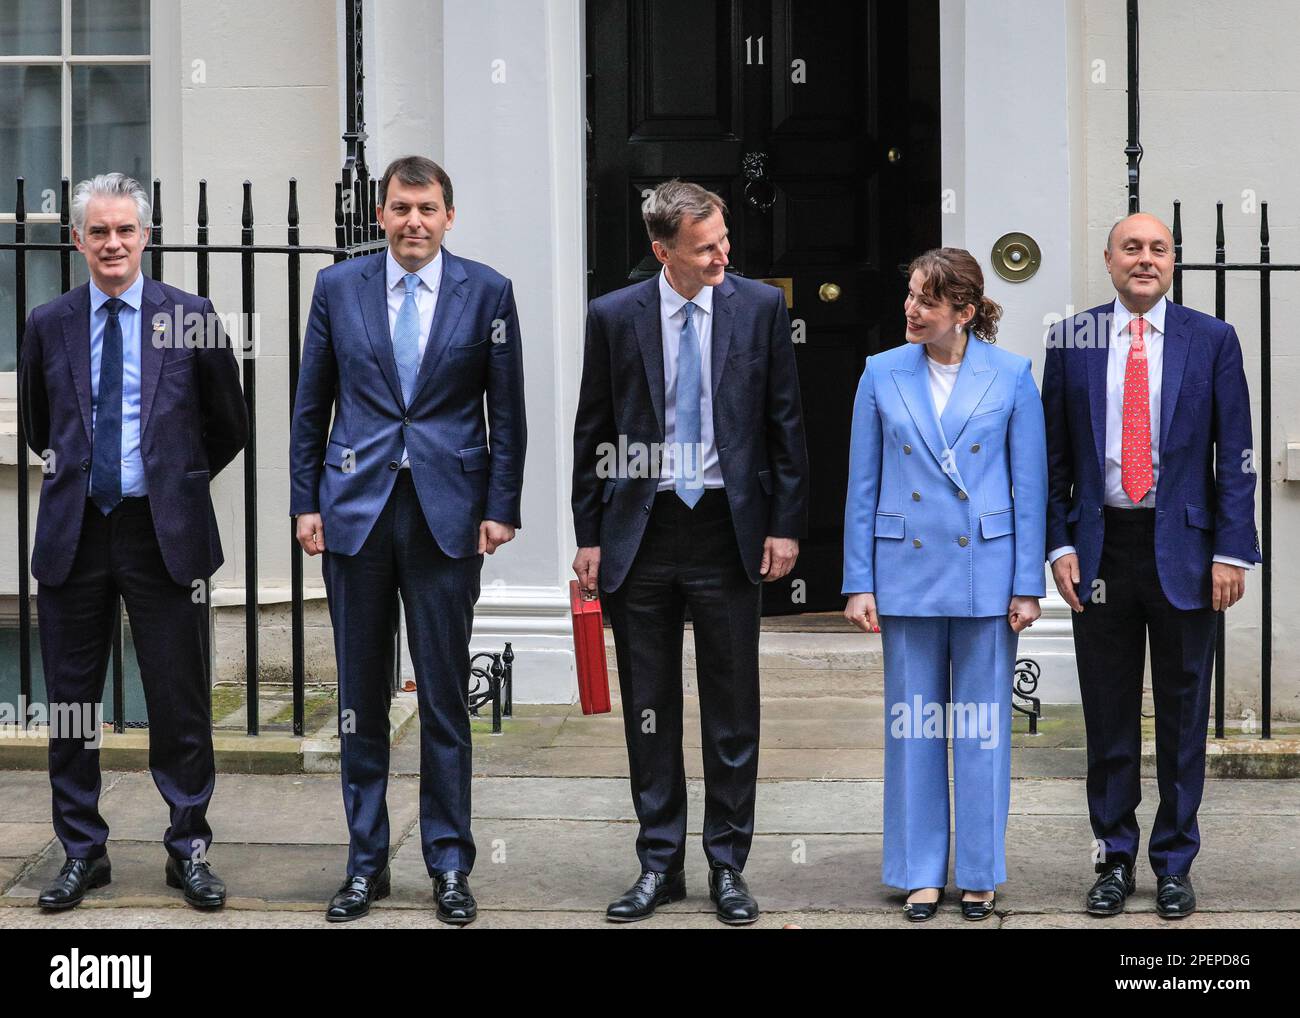 London, UK. 15th Mar, 2023. (l-t-r) James Cartlidge, John Glen, Jeremy Hunt, Victoria Atkins, Andrew Griffith. Jeremy Hunt, MP, Chancellor of the Exchequer outside No 11 Downing Street with the iconic red despatch box, which the briefcase is known as, before he delivers the Spring Budget to Parliament. Credit: Imageplotter/Alamy Live News Stock Photo